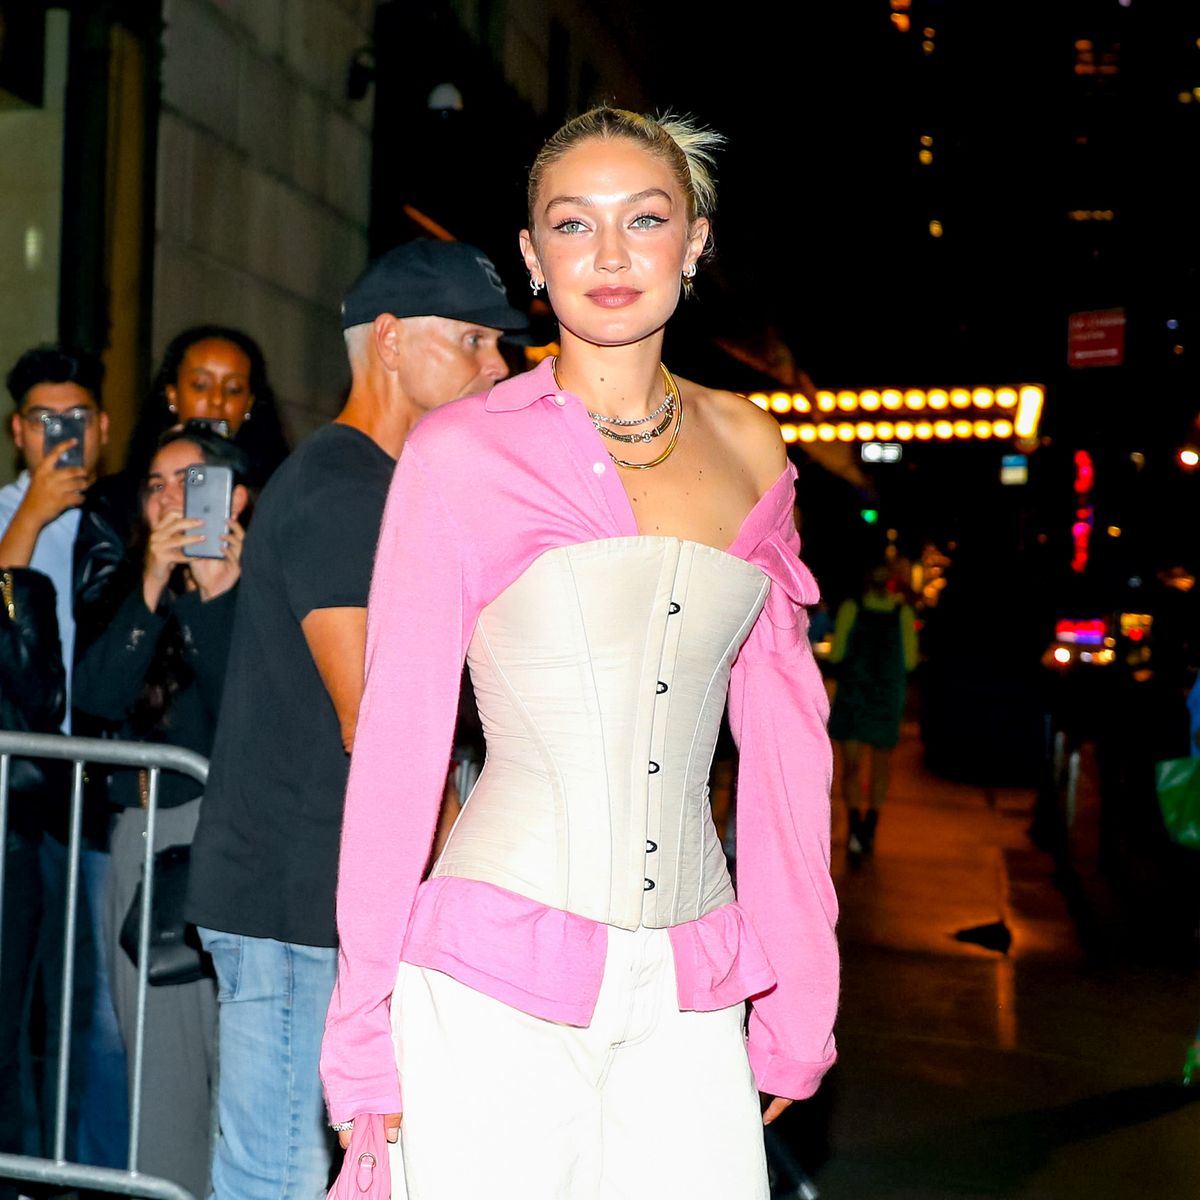 Exclusive: Get to Know the Designer of Gigi Hadid's New Go-To Bag